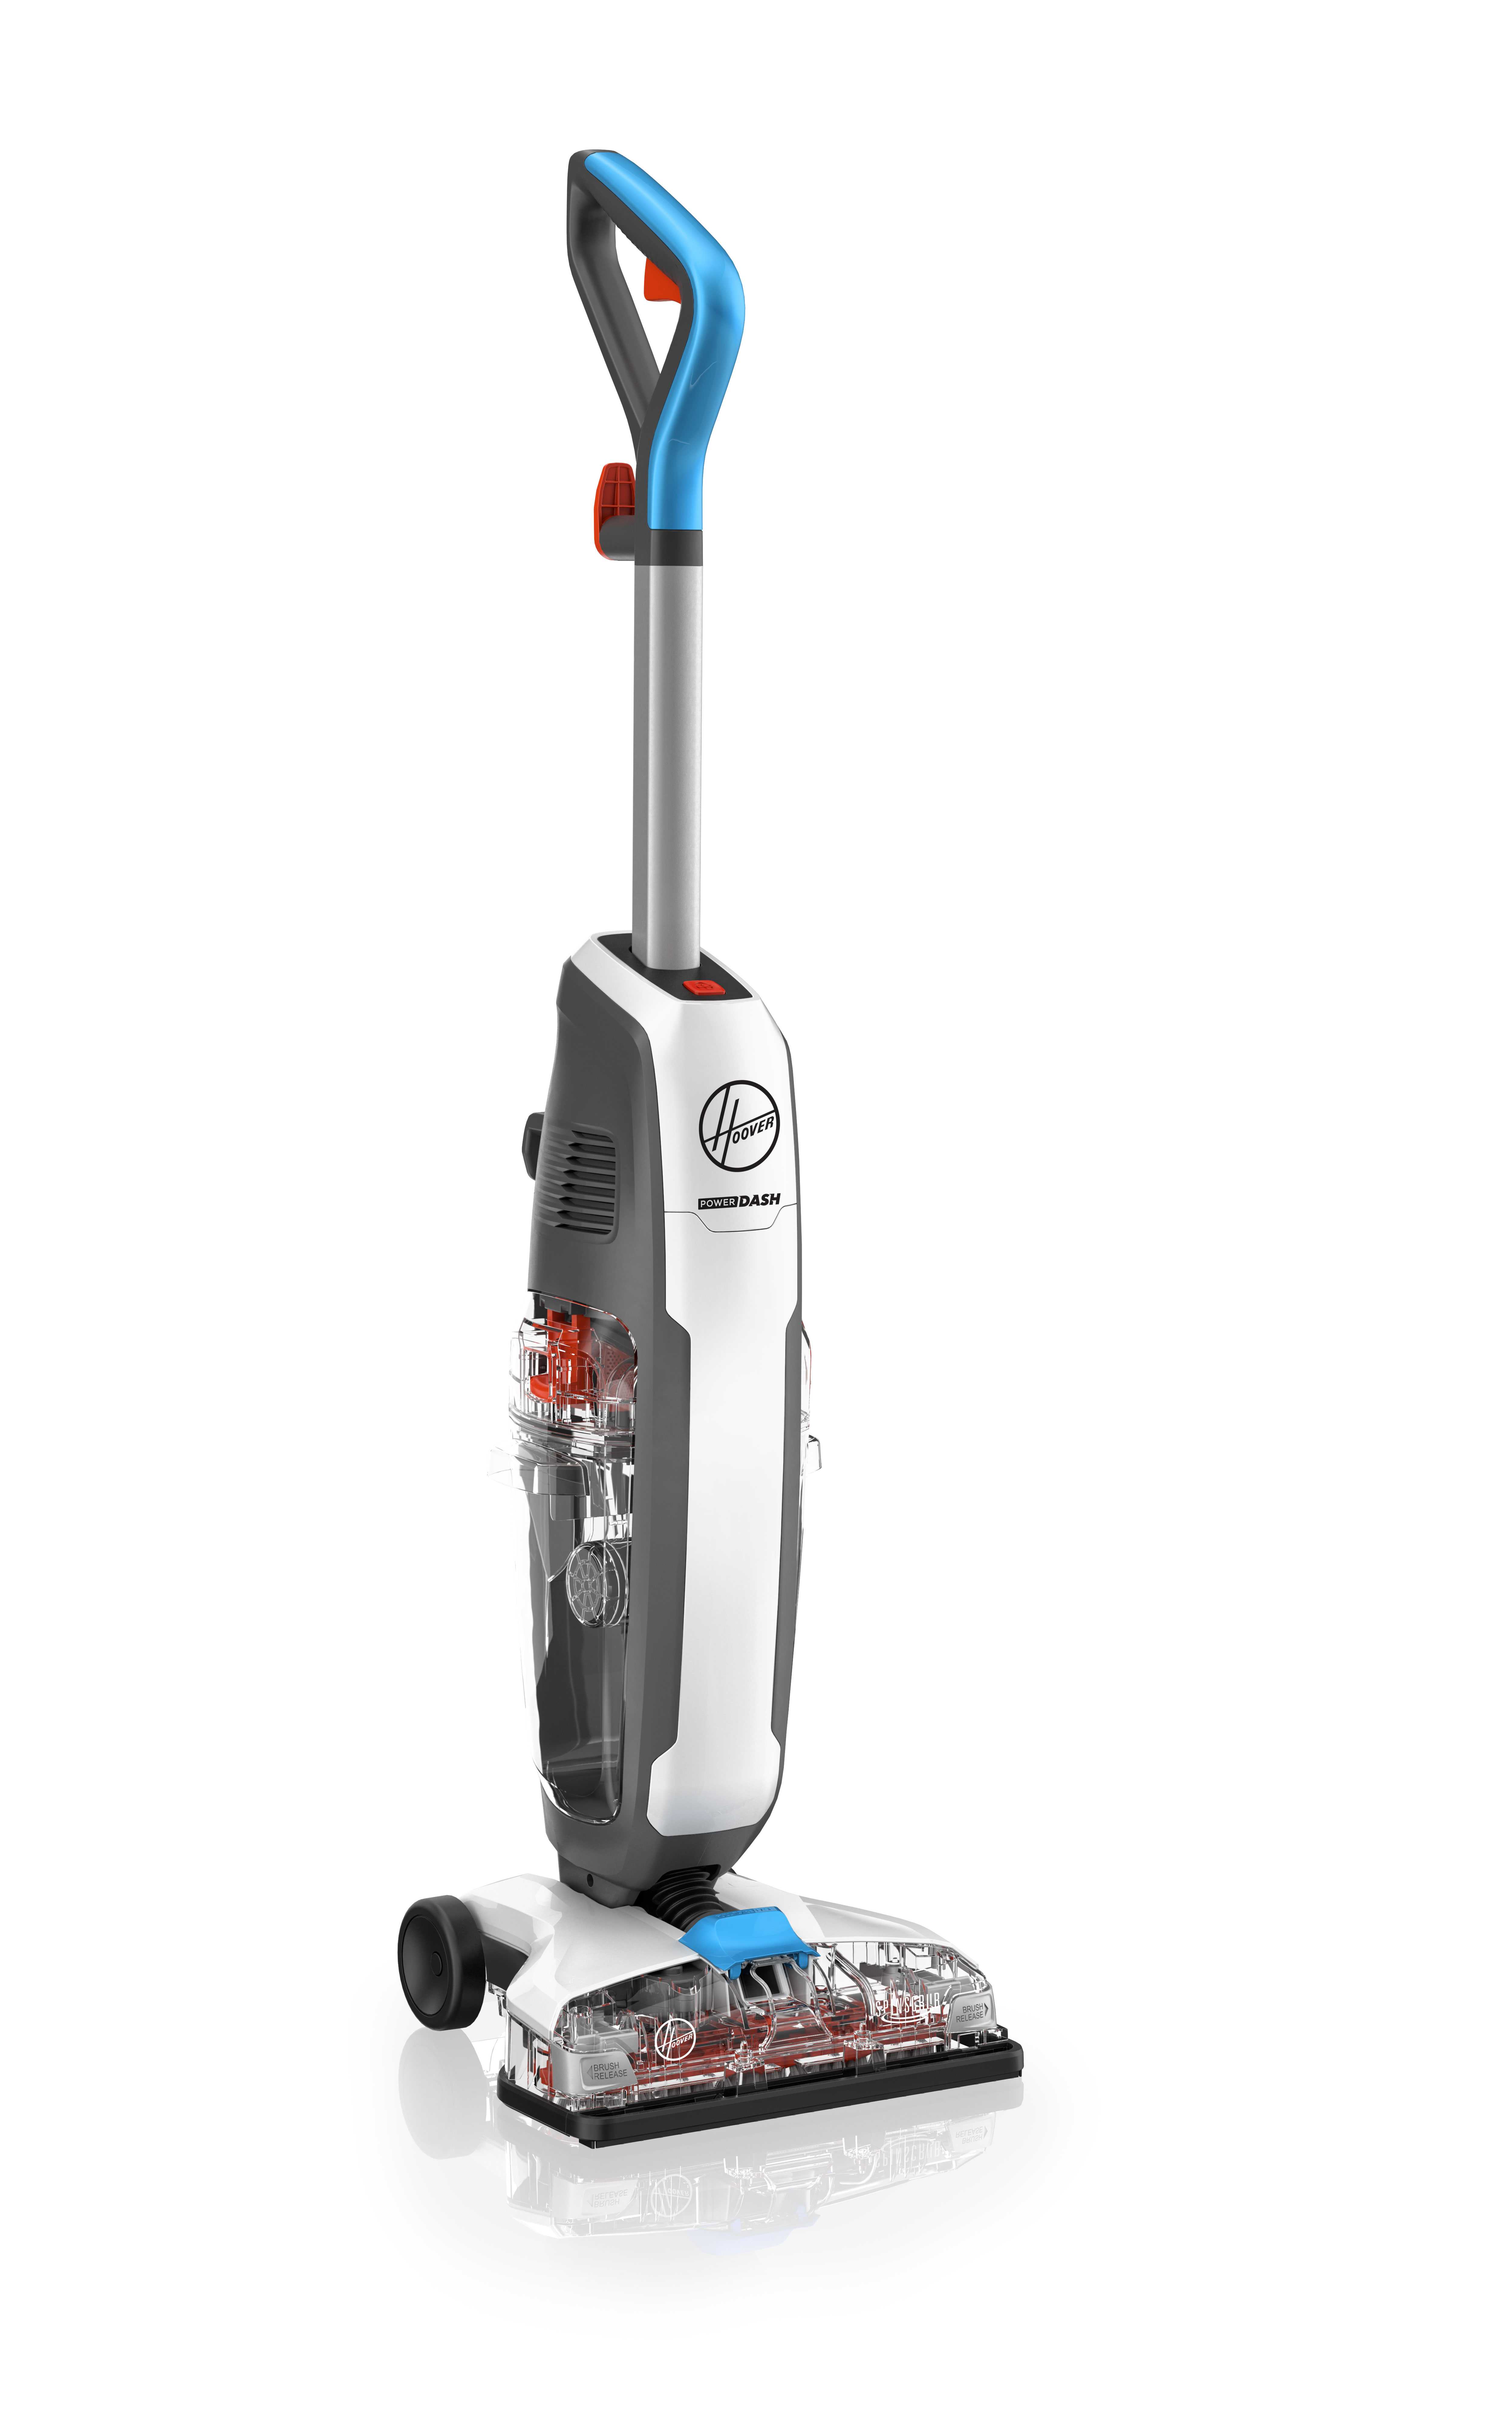 Hoover PowerDash Hard Floor & Multi-Surface Upright Cleaner, FH41010 - image 3 of 14